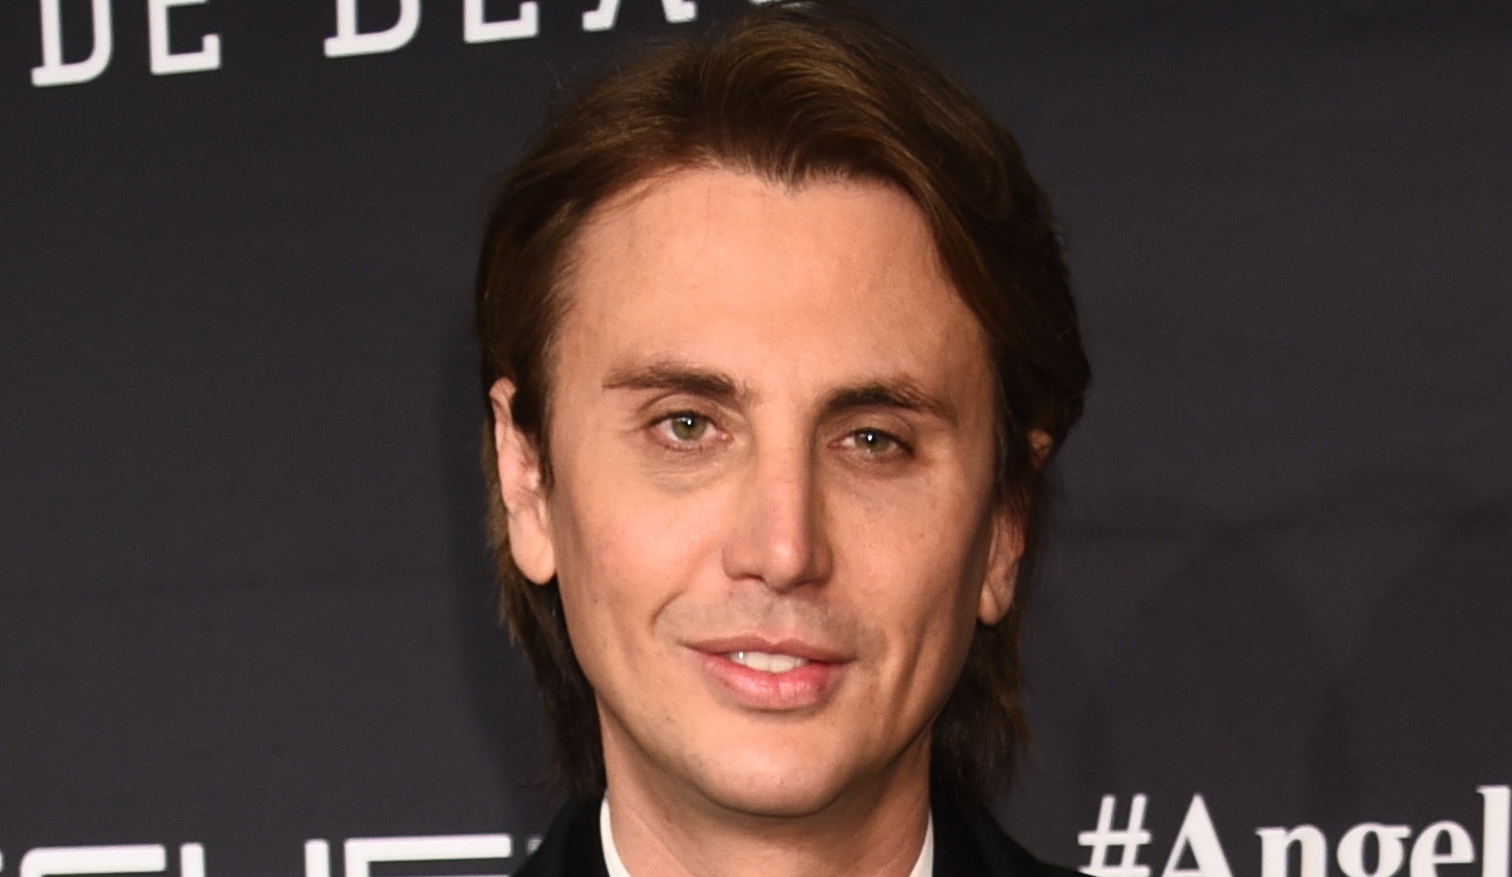 Jonathan Cheban Body Shames a Woman on Instagram After She Criticized Him f...